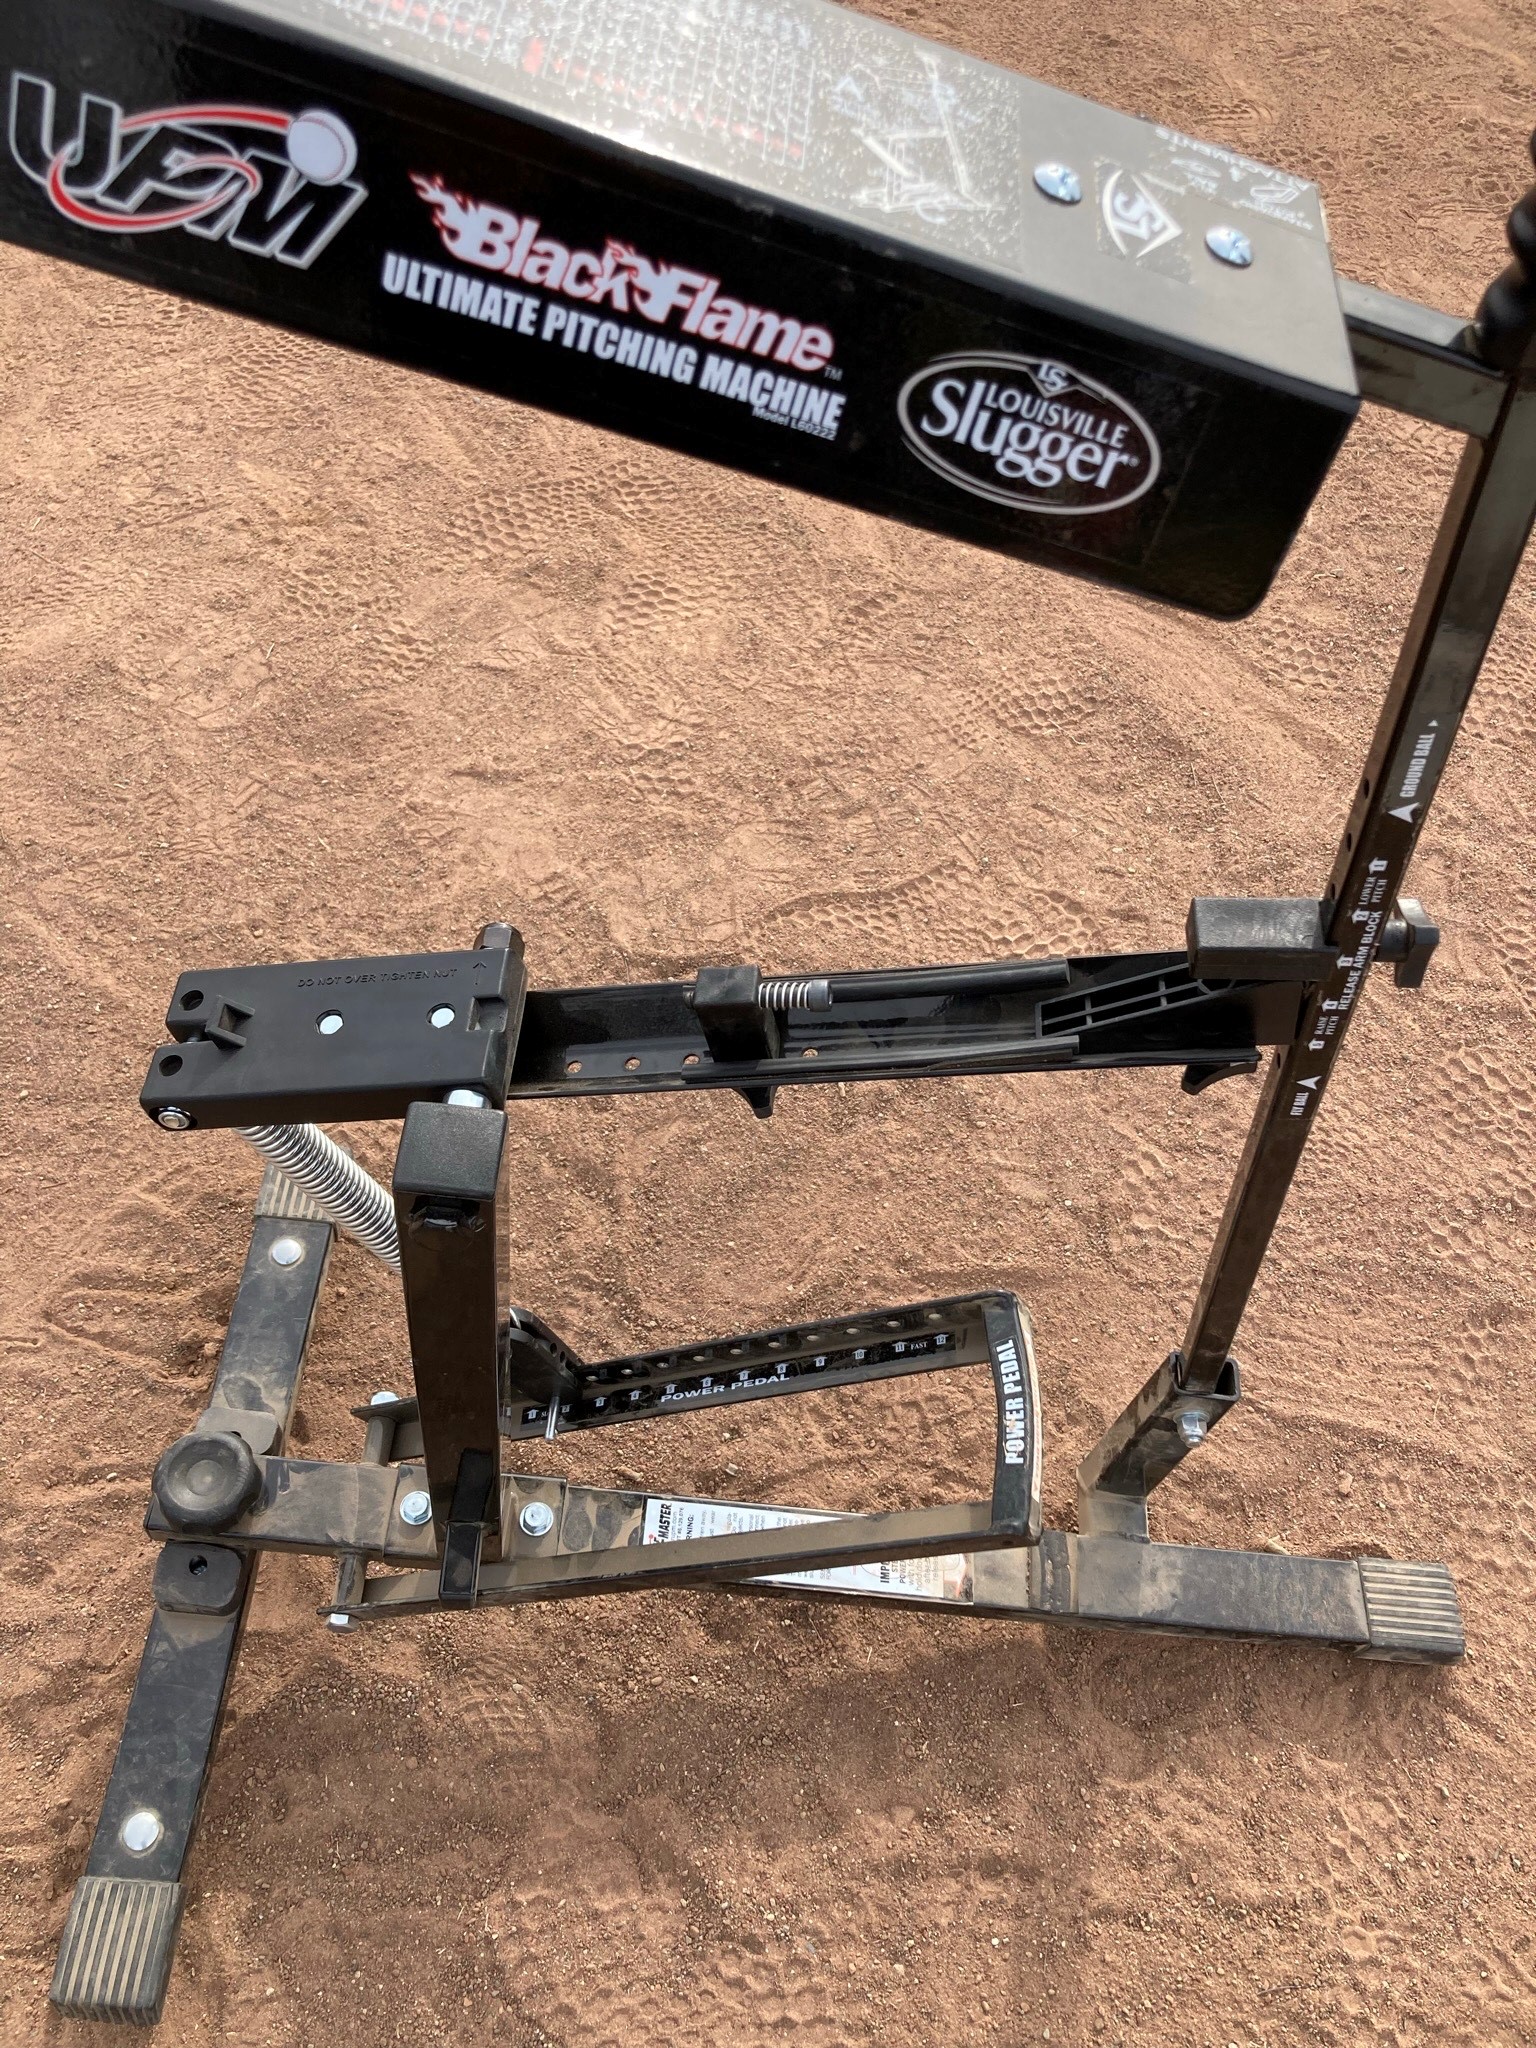 Louisville Slugger Black Flame Pitching Machine - Review